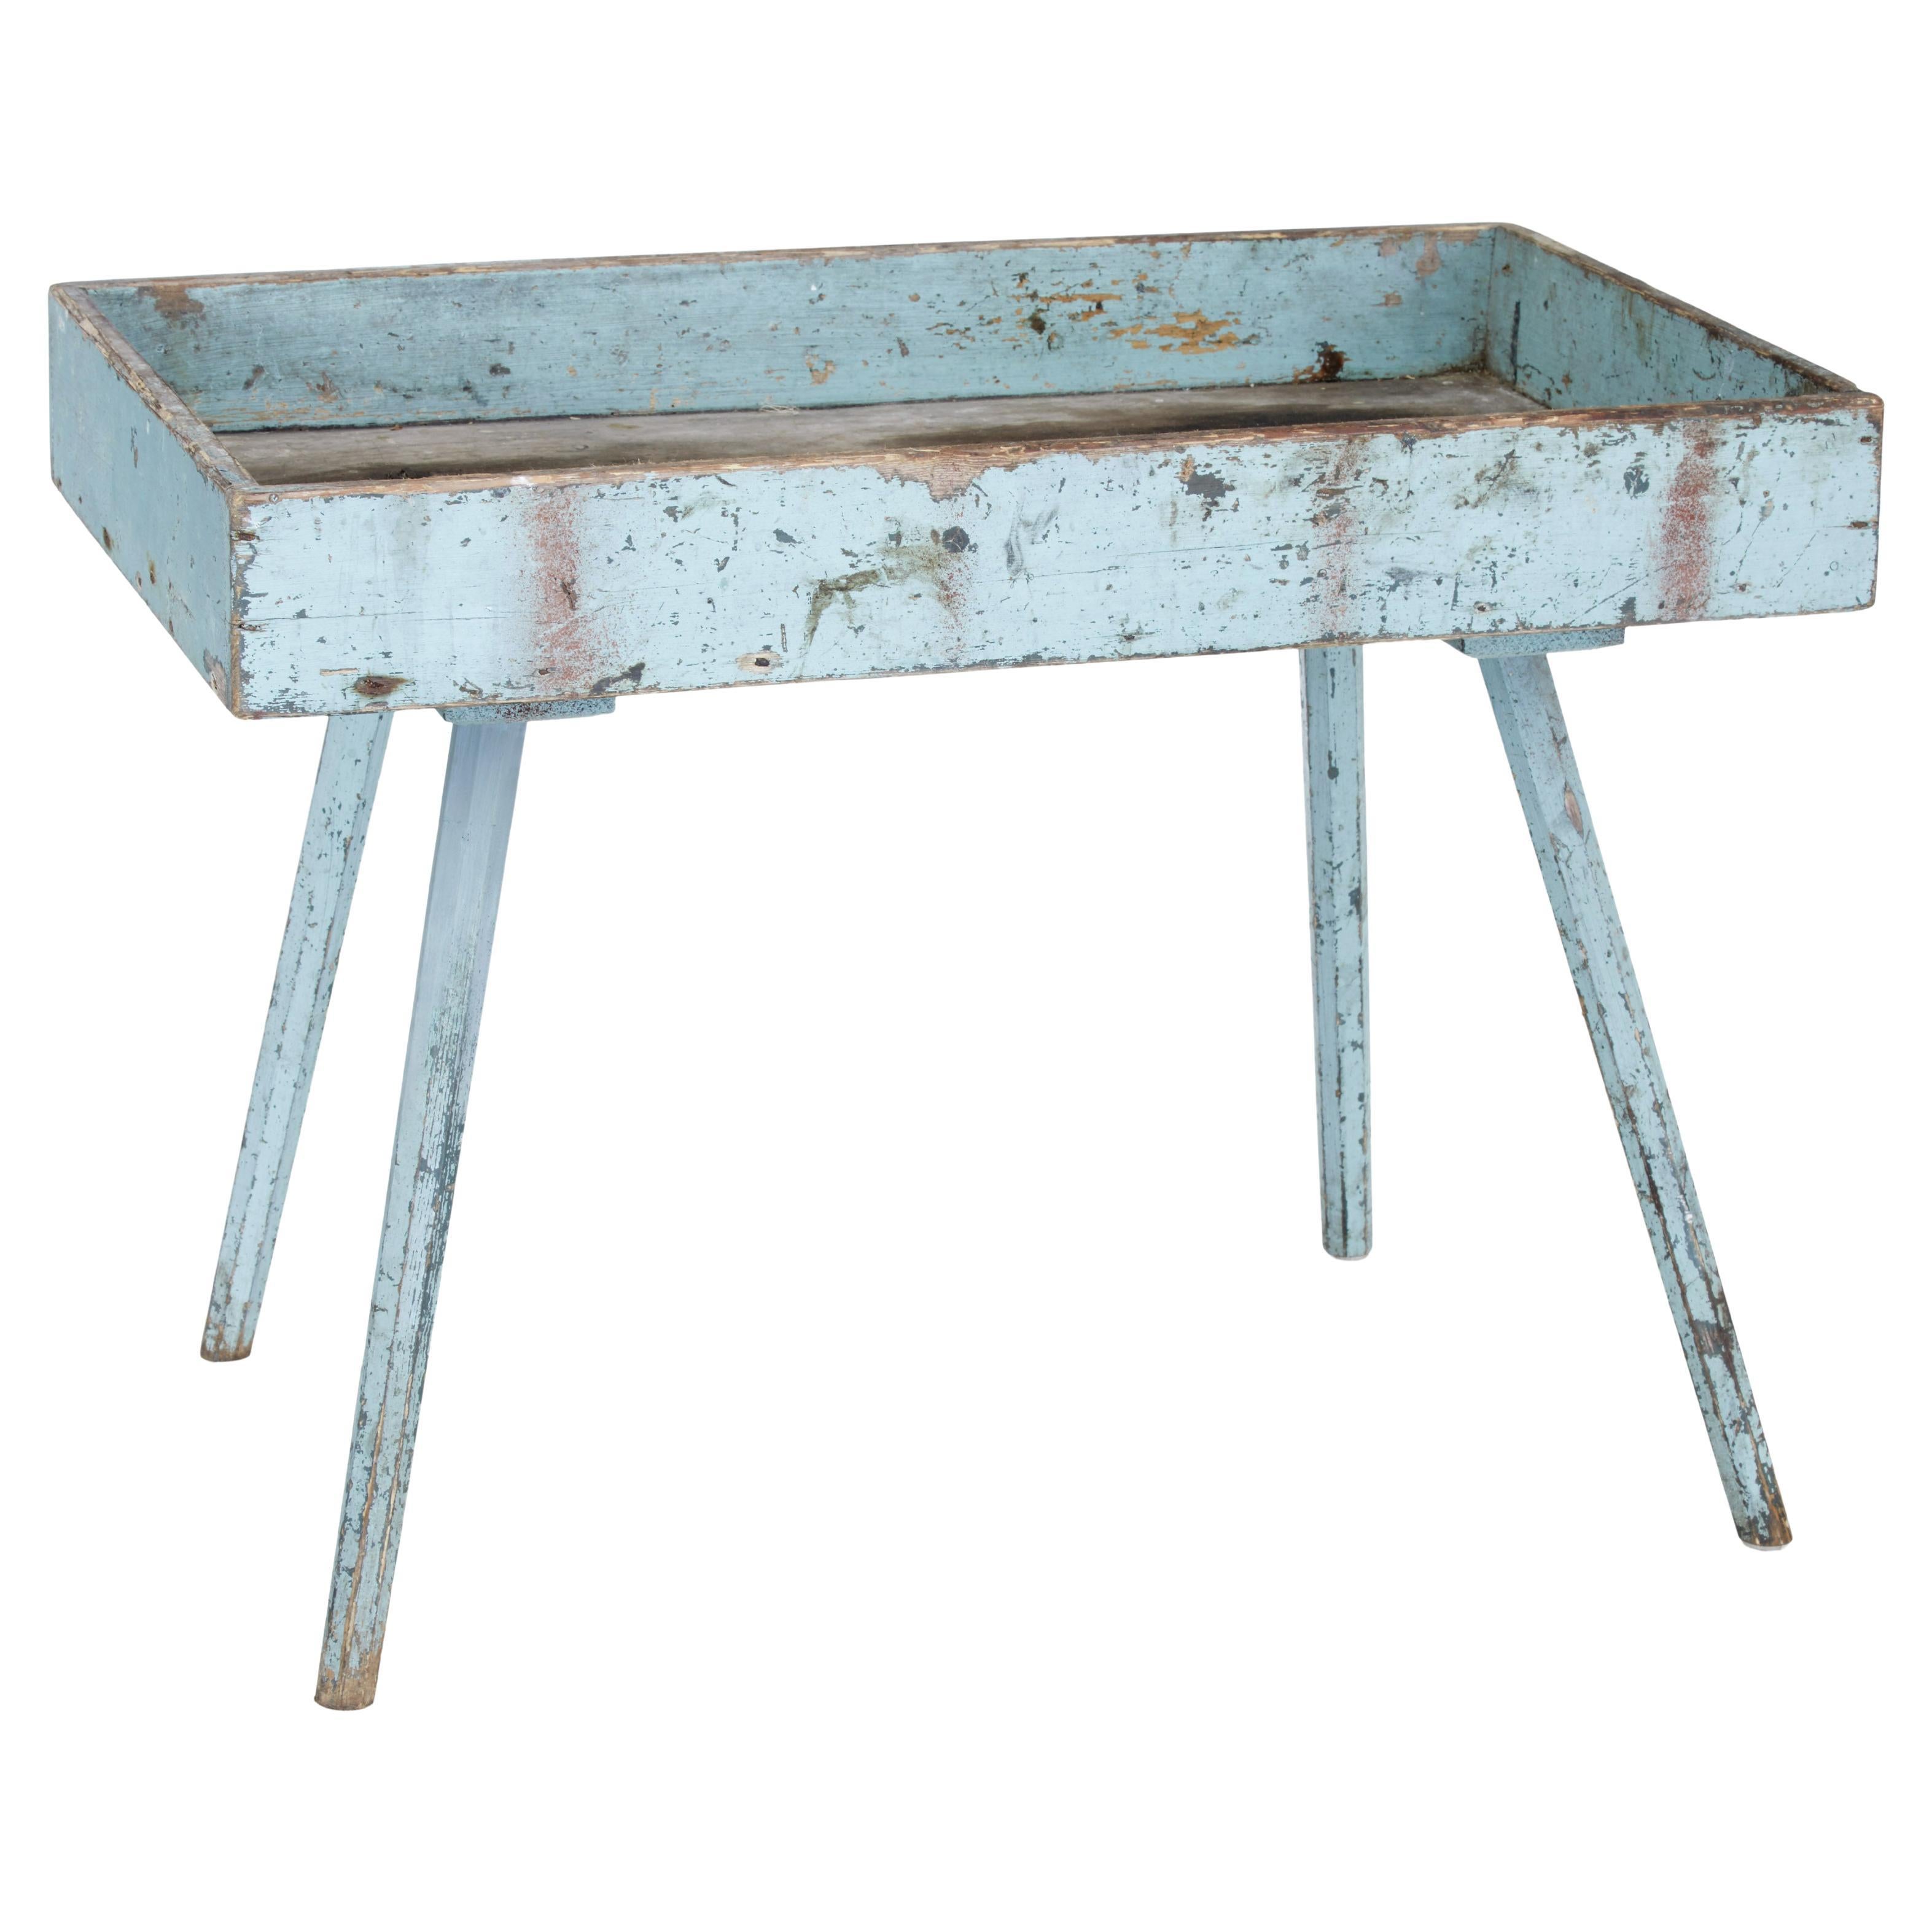 19th Century Rustic Painted Pine Garden Room Tray Table